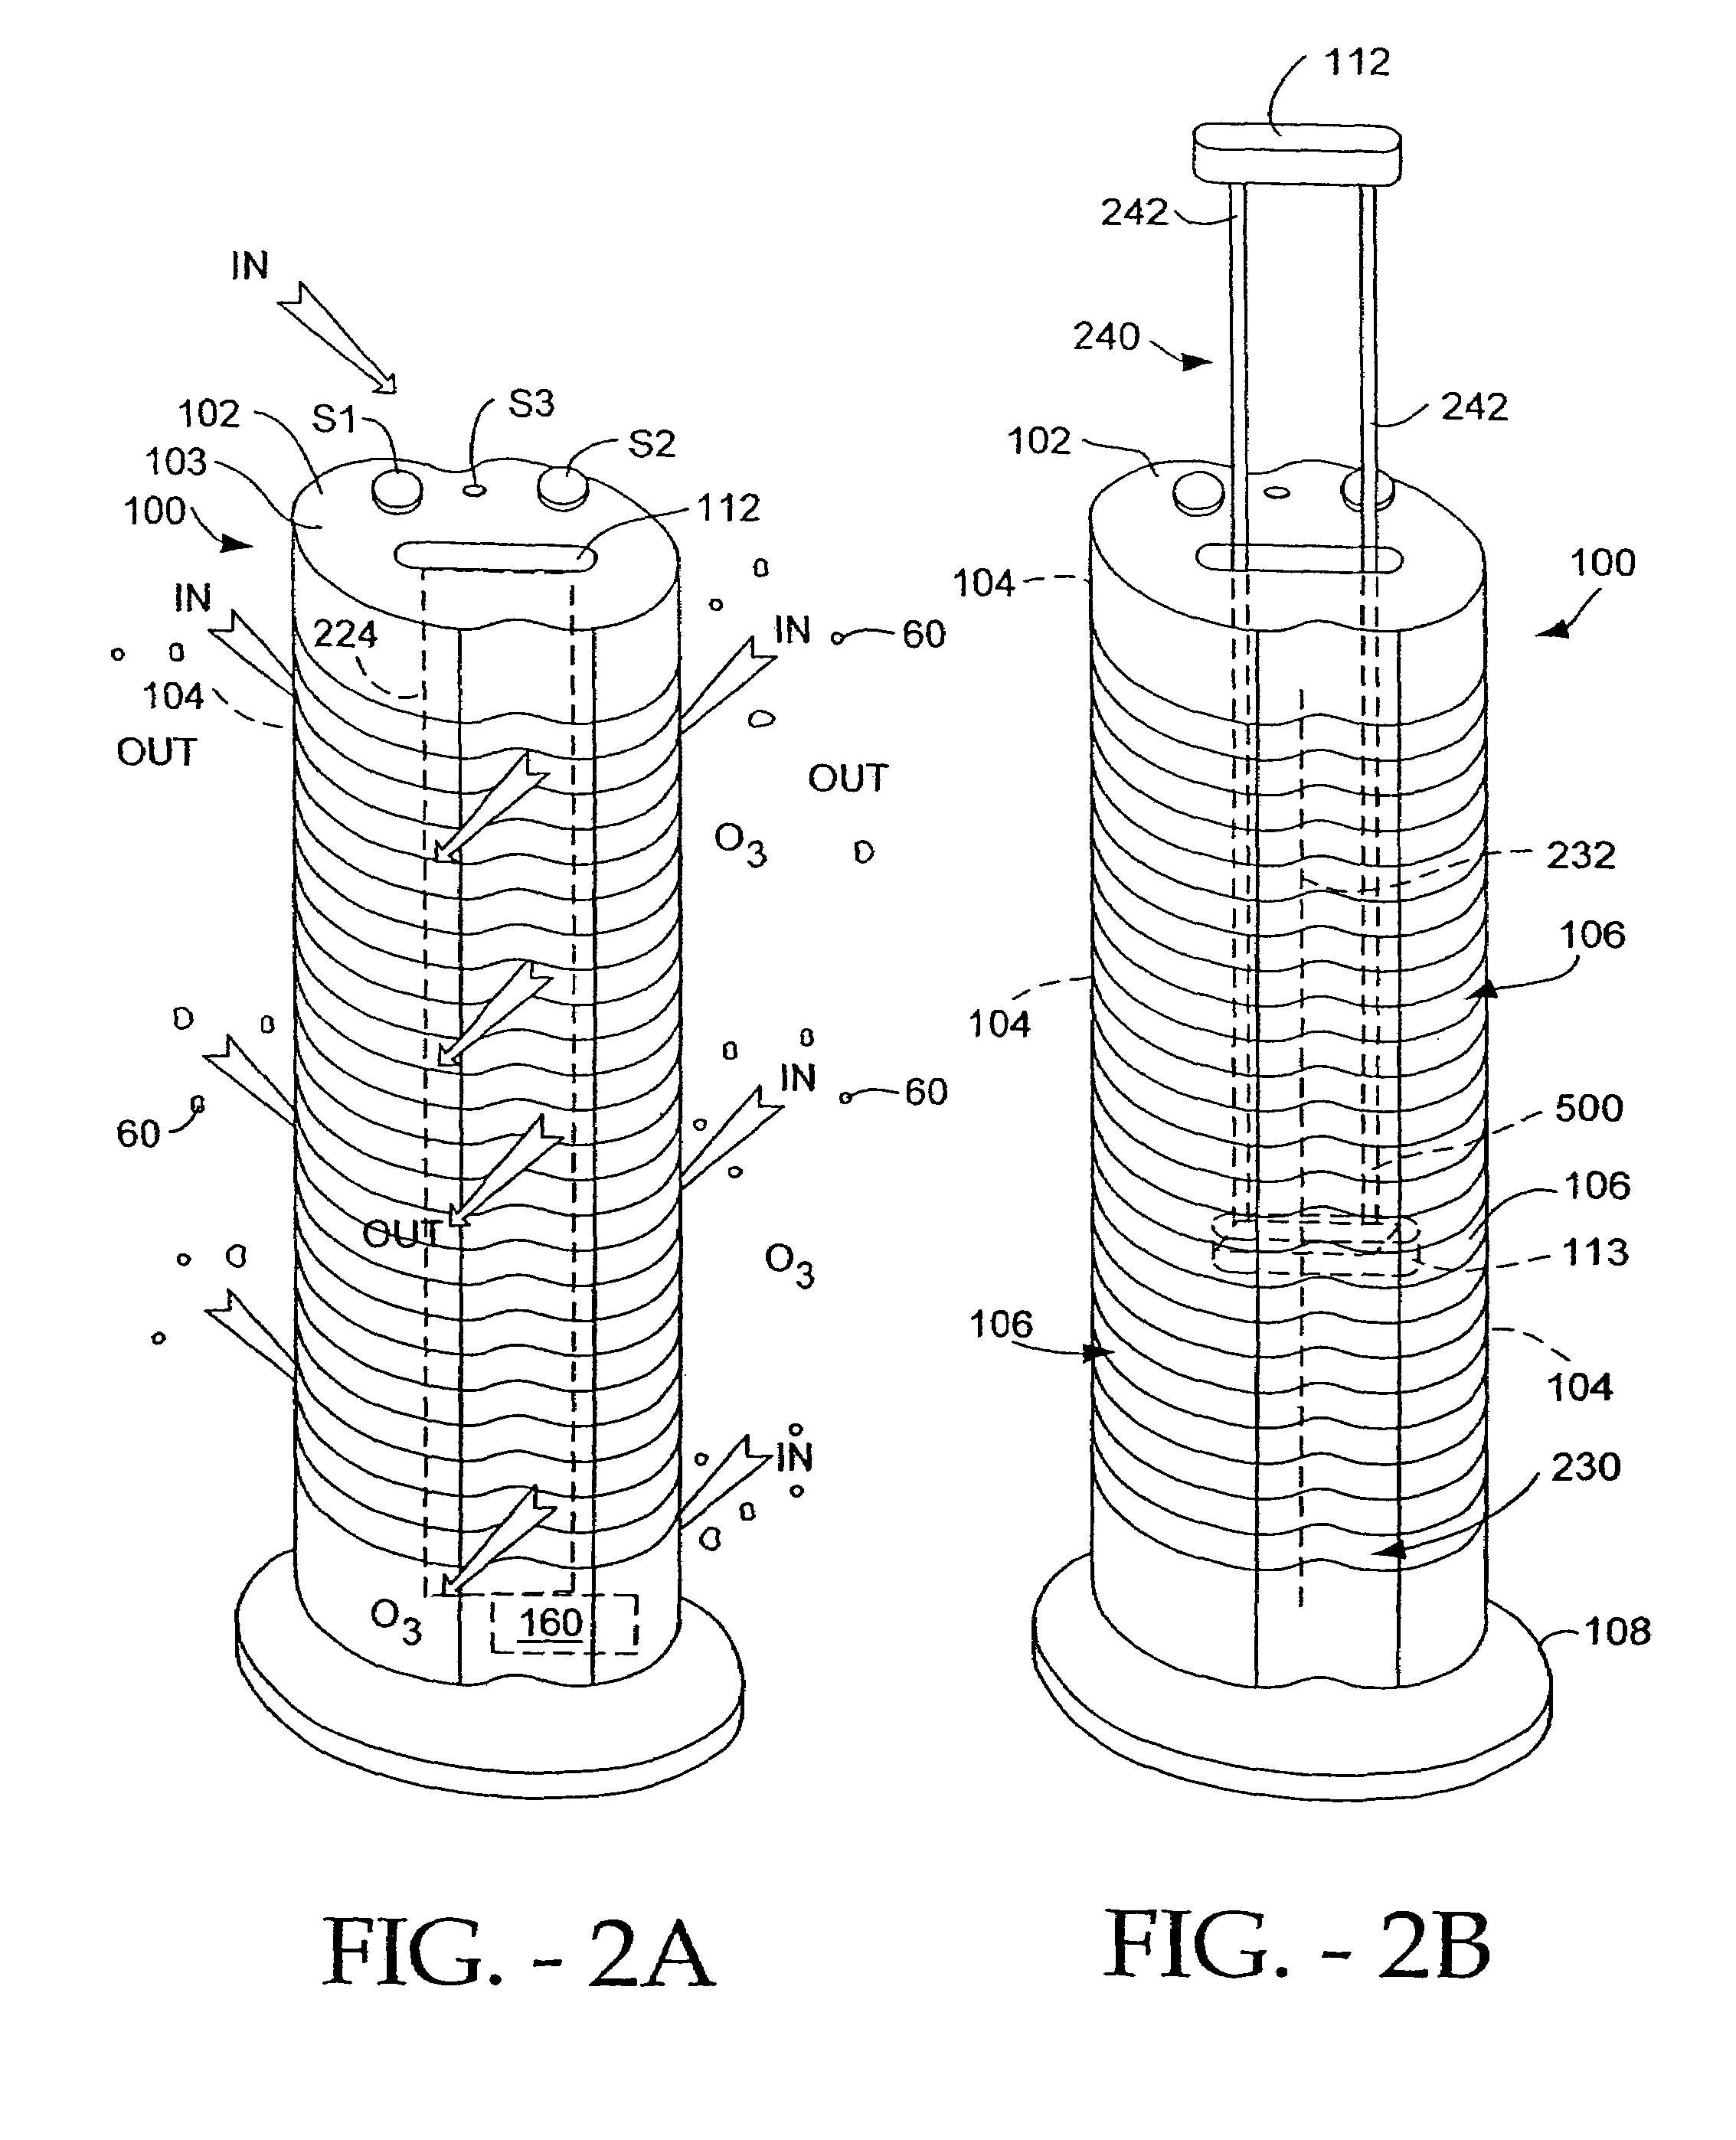 Air treatment apparatus having an electrode extending along an axis which is substantially perpendicular to an air flow path